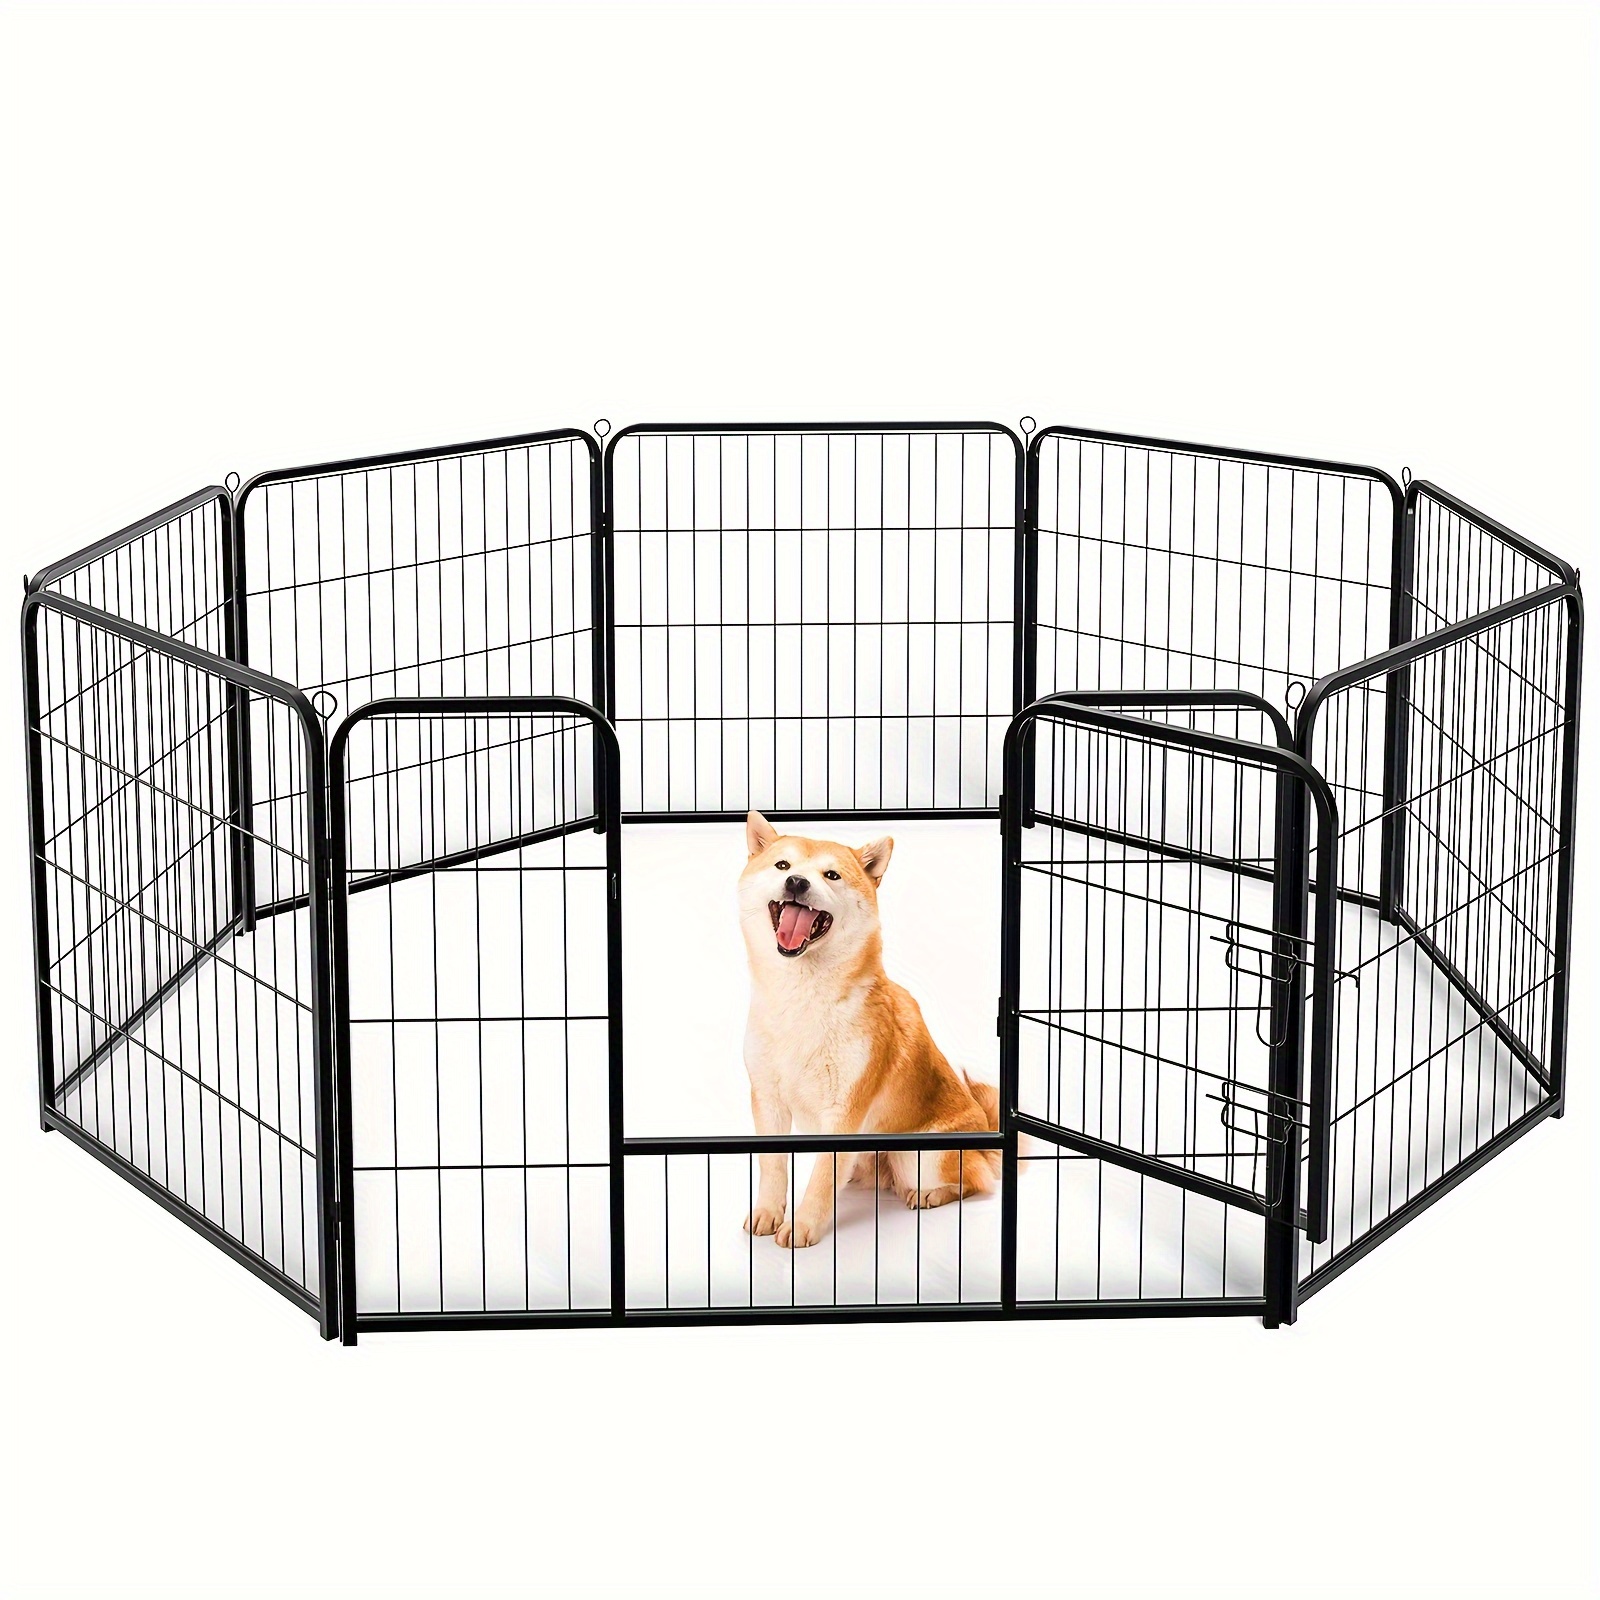 

Dog Playpen Indoor Pet Fence Outdoor 8 Panel 32" Height Metal Exercise Puppy Pen With Door For Large/medium/small Dogs Portable For Garden, Yard, Living Room